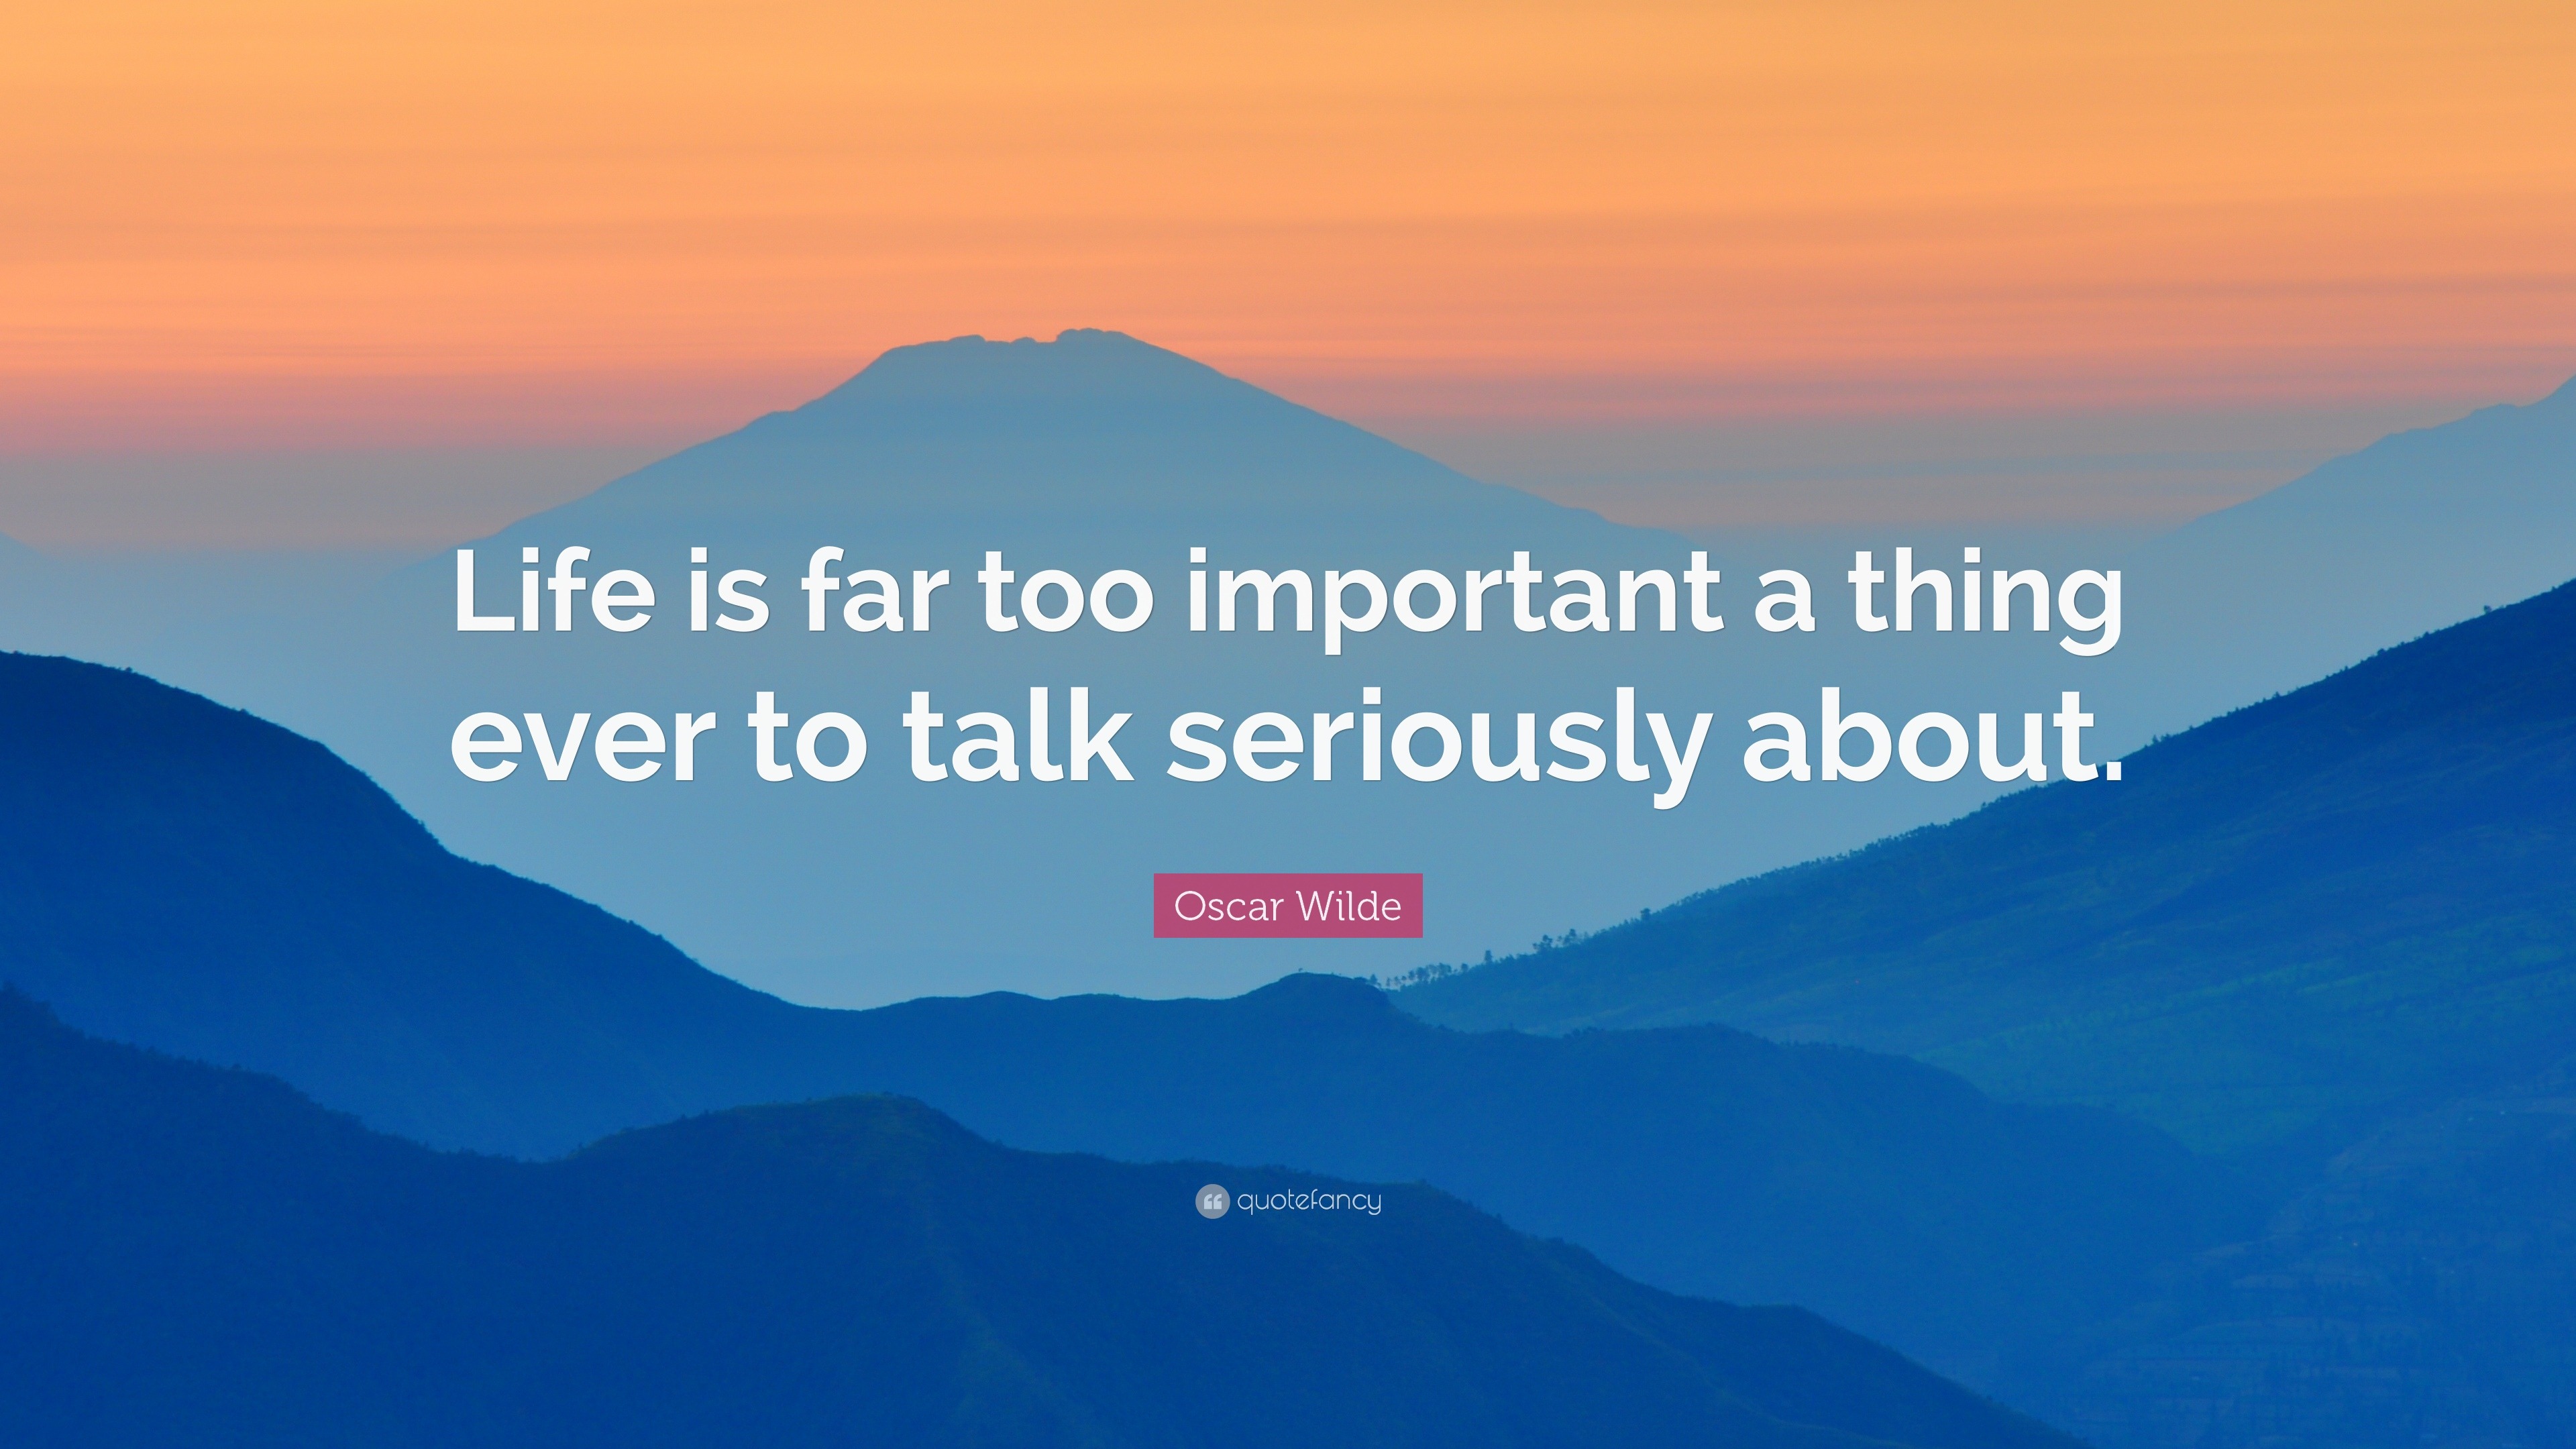 Oscar Wilde Quote: “Life is far too important a thing ever to talk